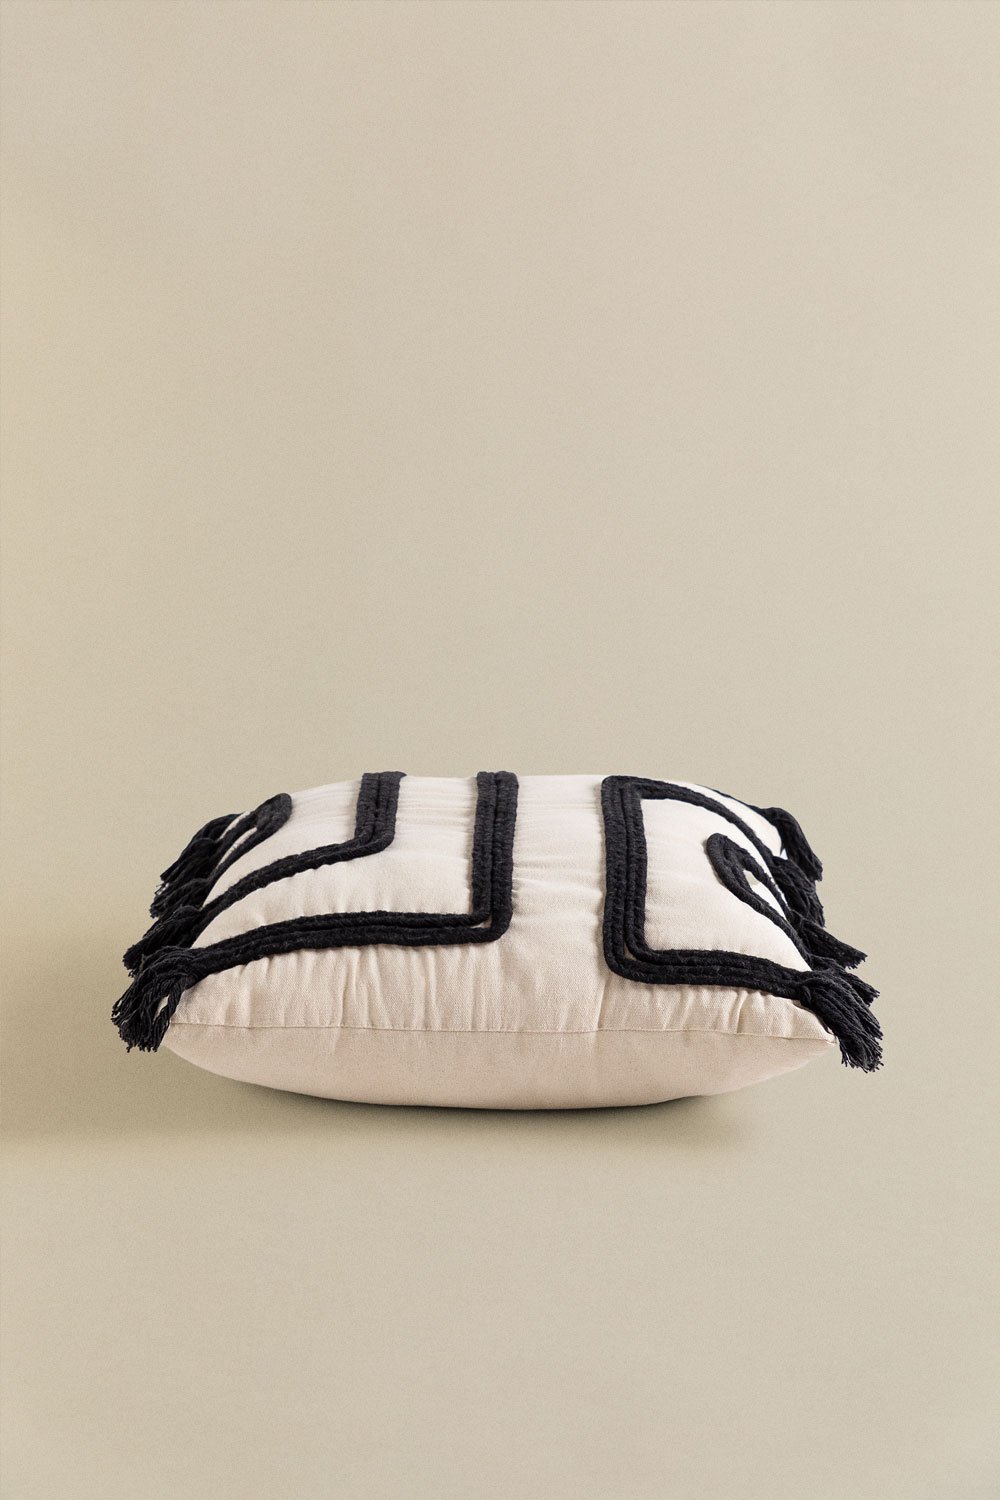 Square Cotton Cushion (45 x 45 cm) Darcy, gallery image 2